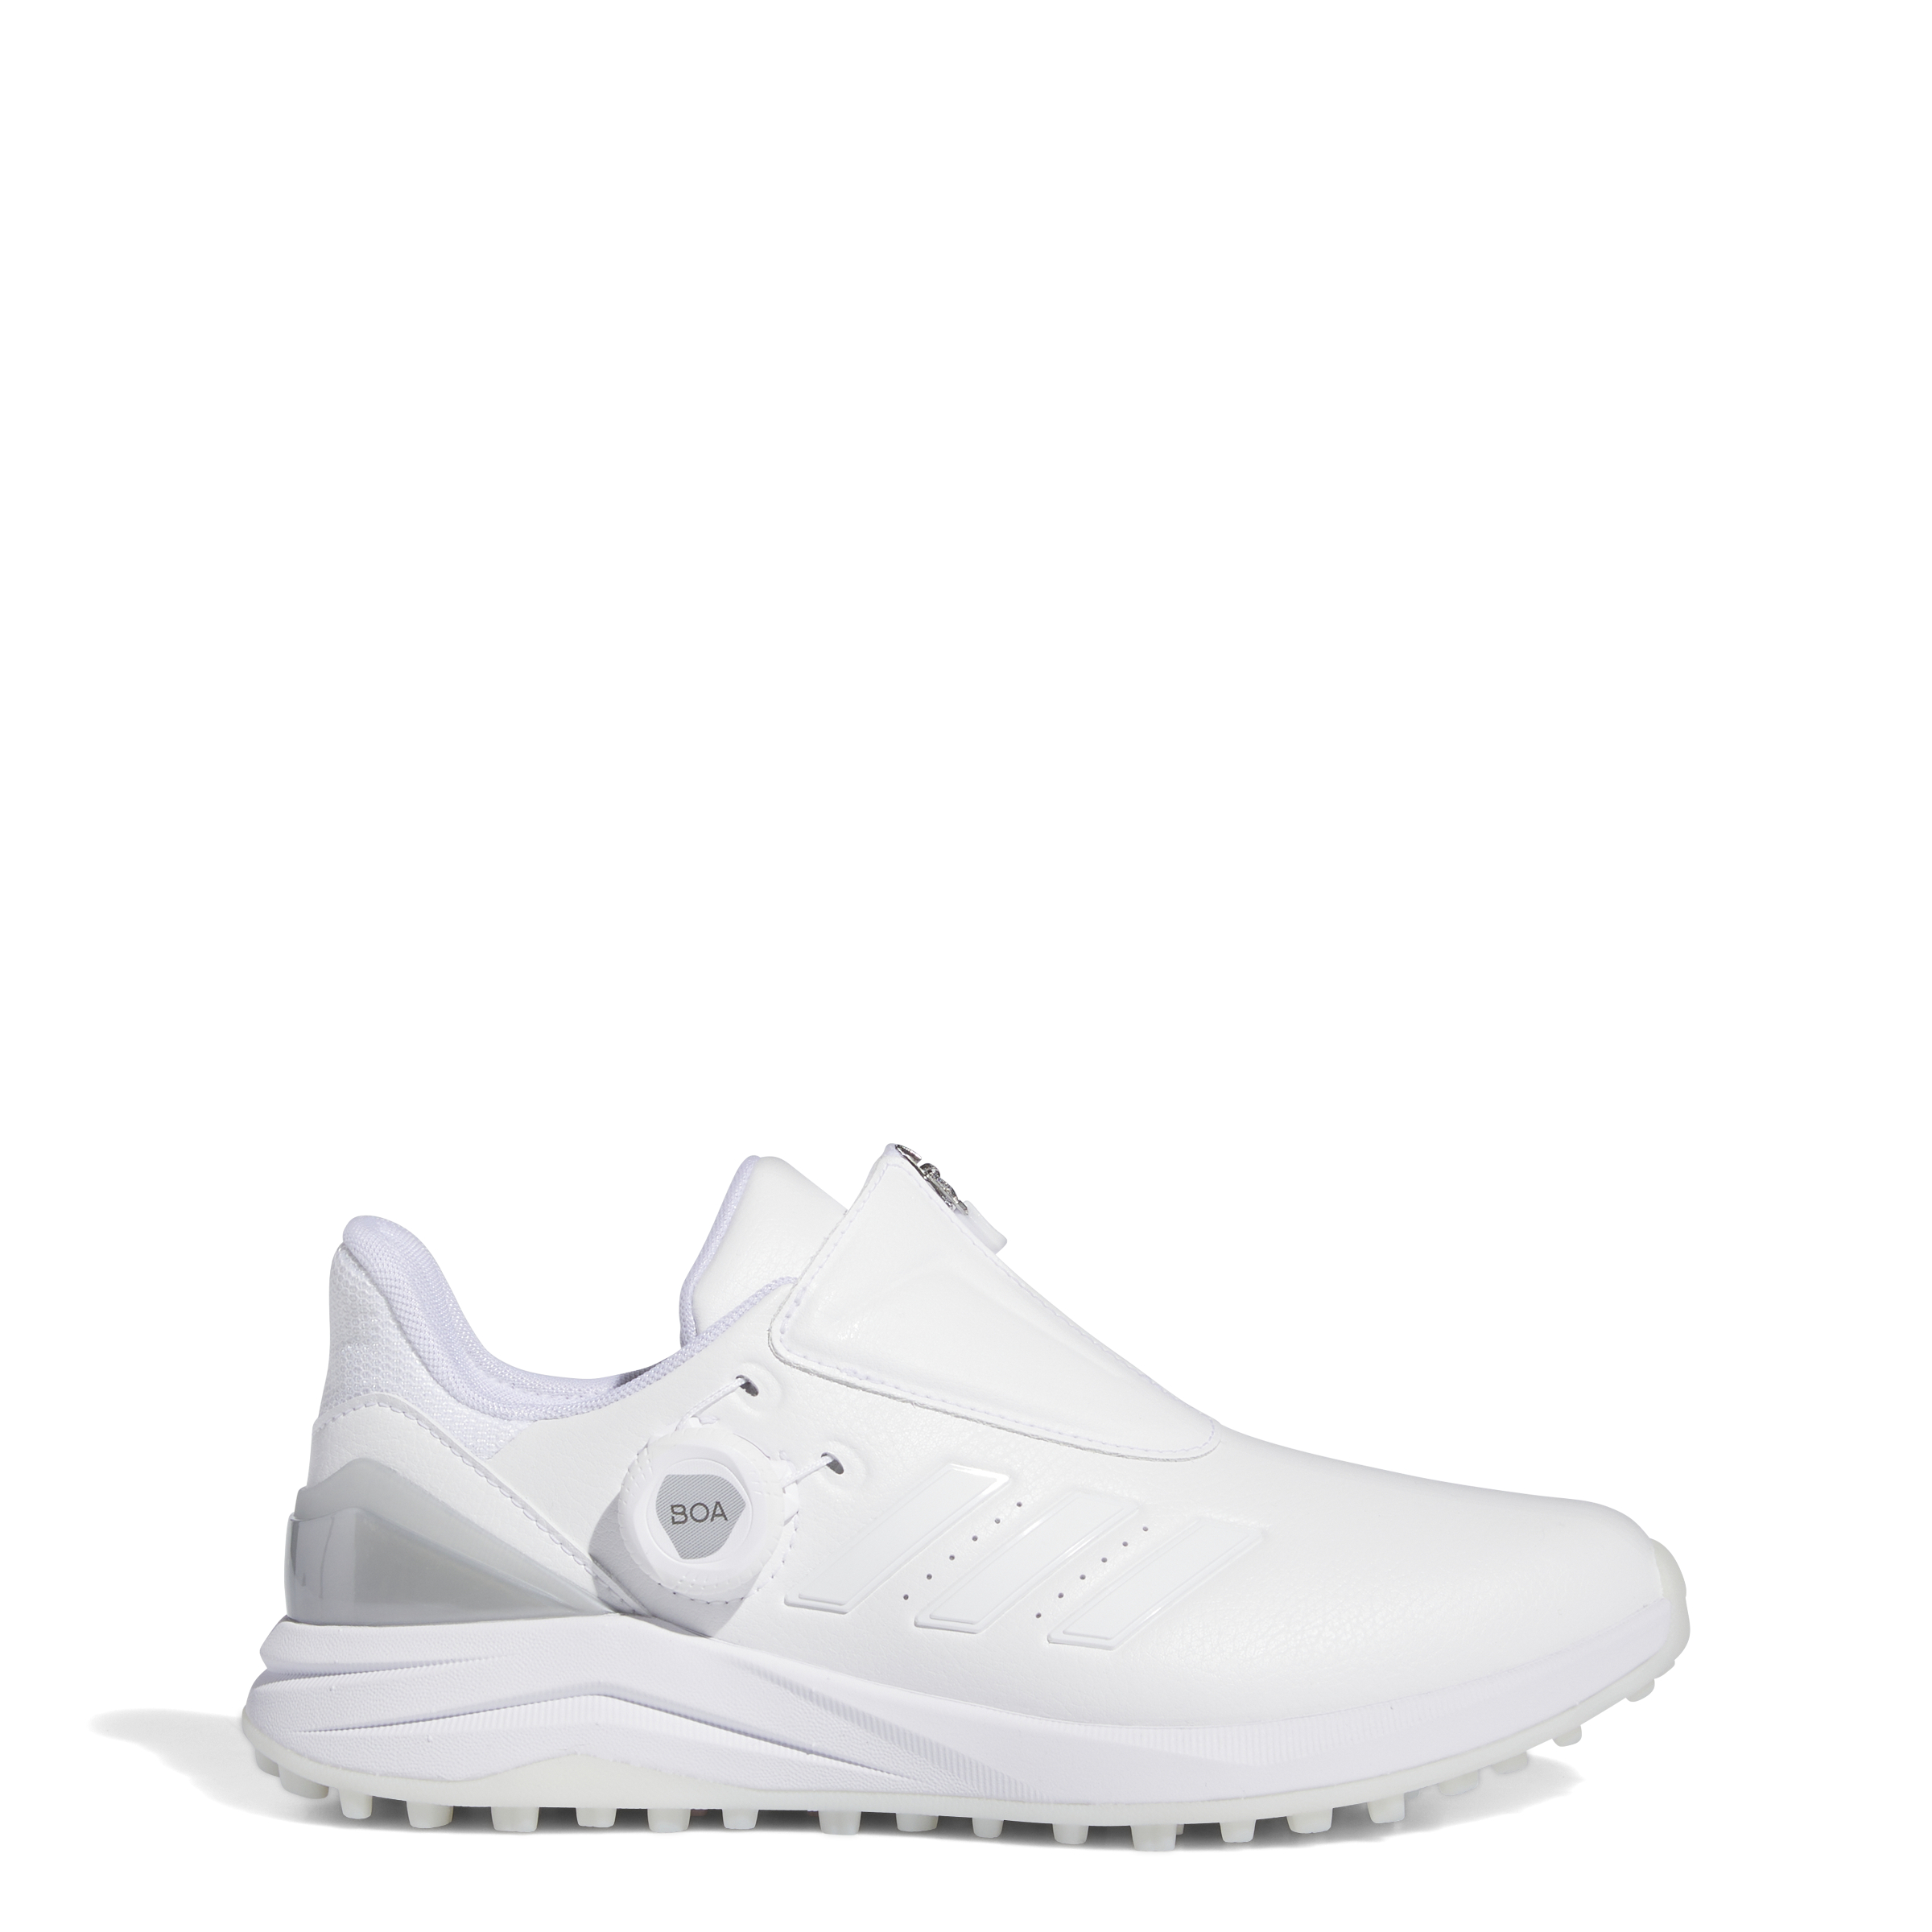 Adidas | IF0288 | Solarmotion BOA 24 Spikeless Golf Shoes | Cloud White / Cloud White / Silver Metallic